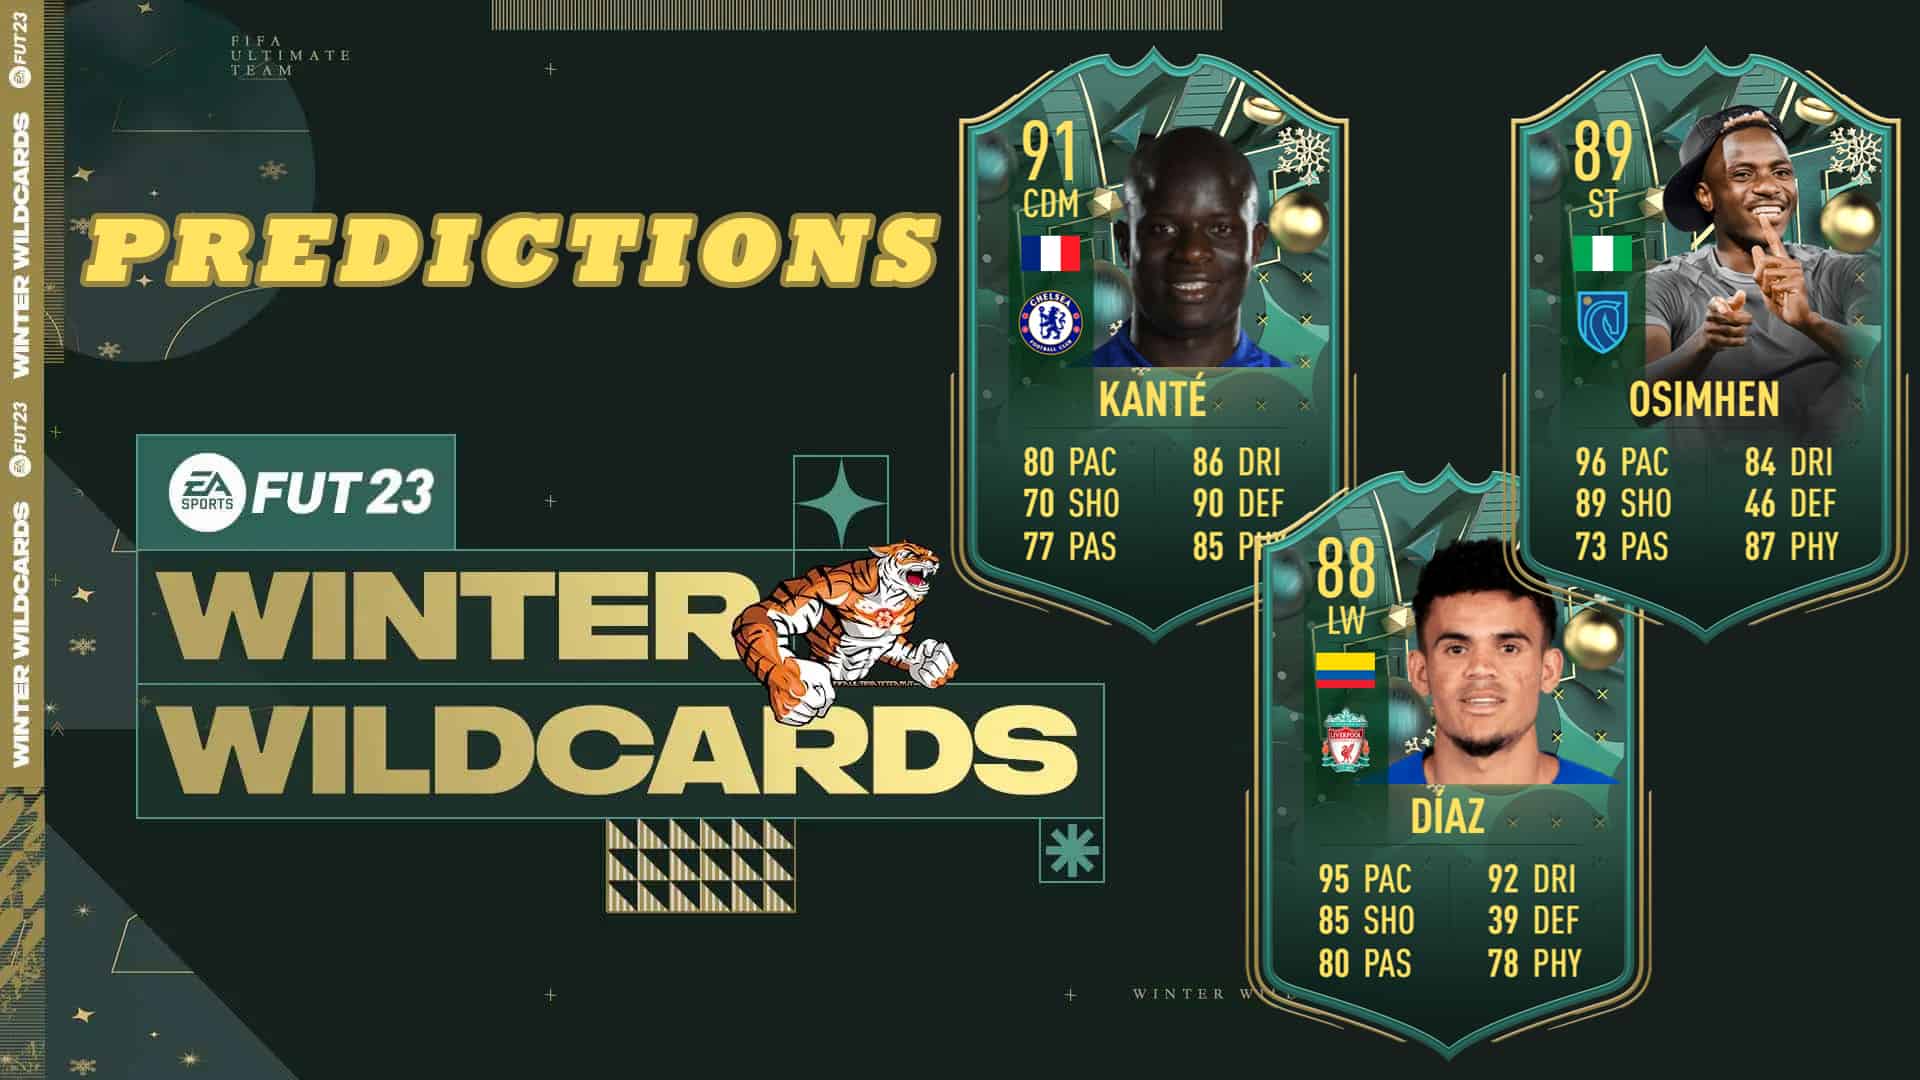 Winter Wildcard full team 2 has been leaked by the same source who